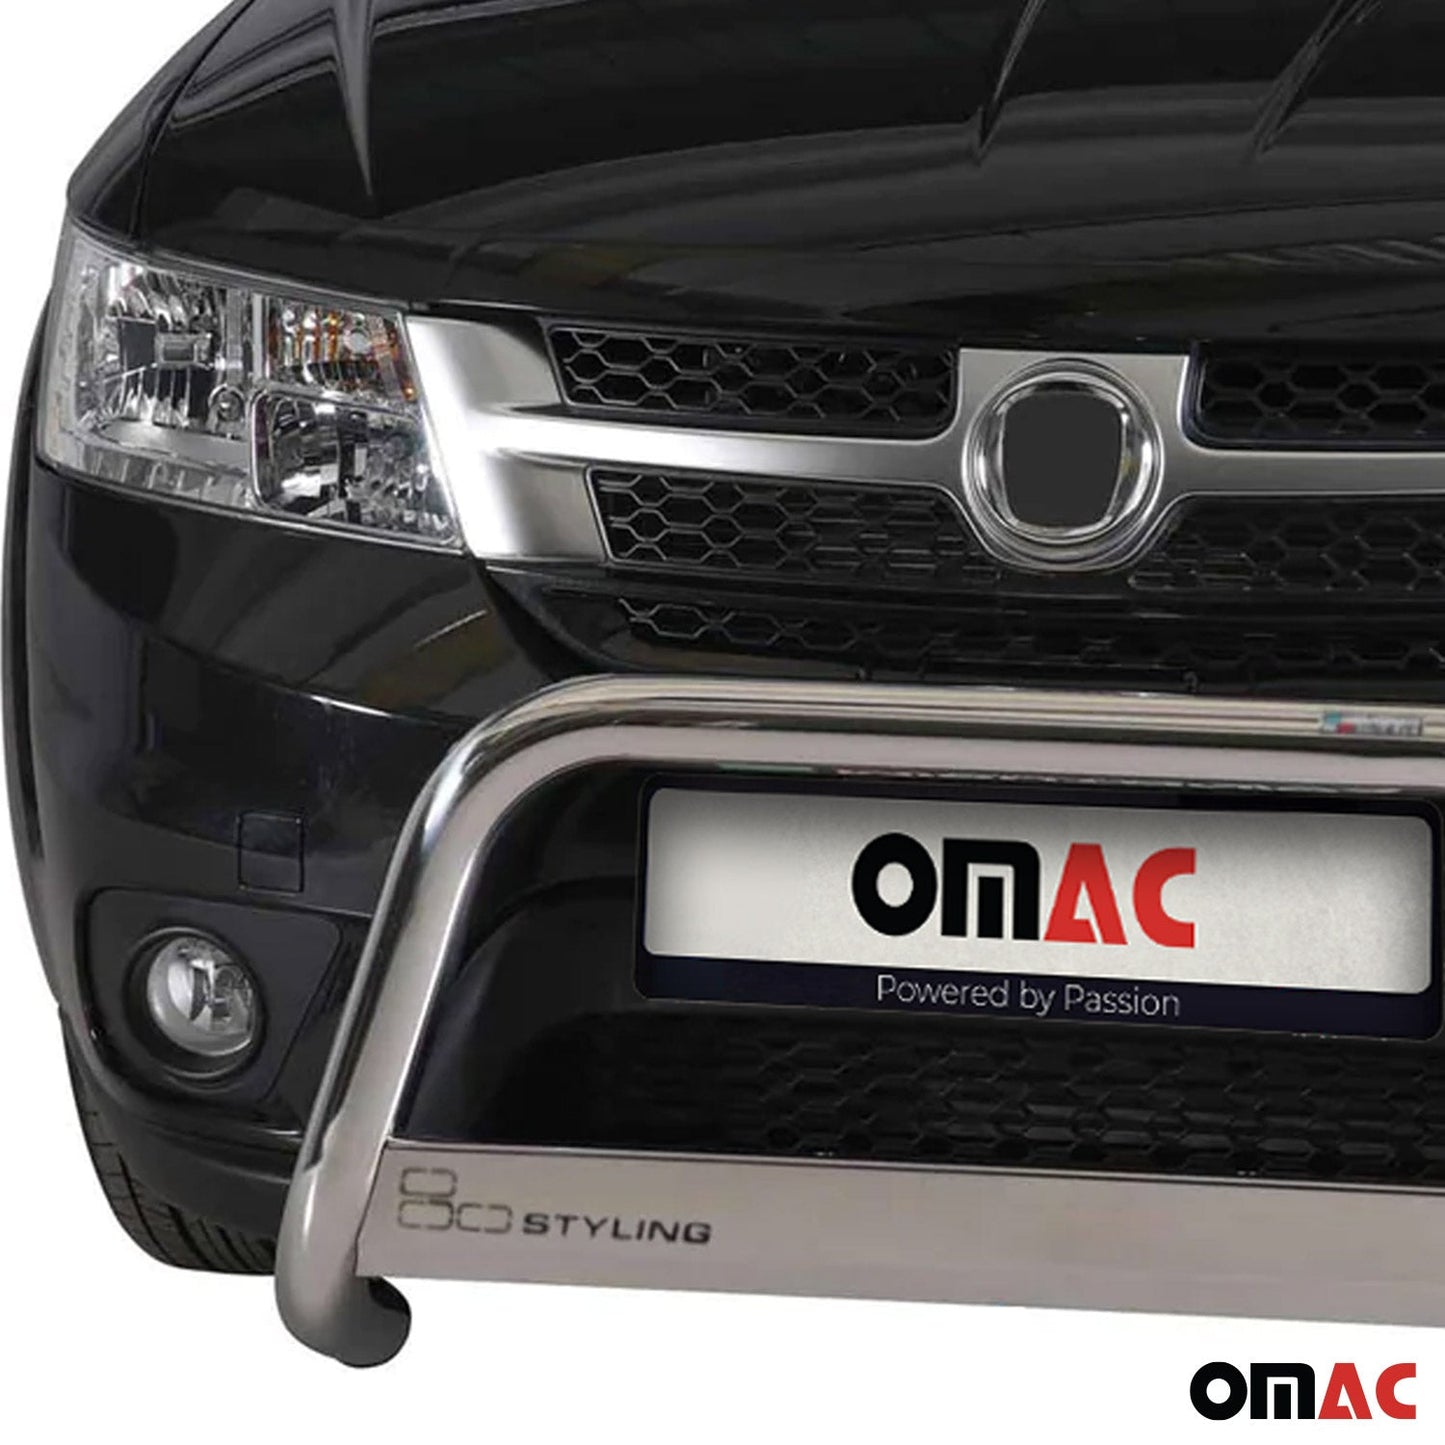 OMAC Bull Bar Push Front Bumper Grille for Dodge Journey 2011-2015 Silver 1 Pc 2528MSBB068